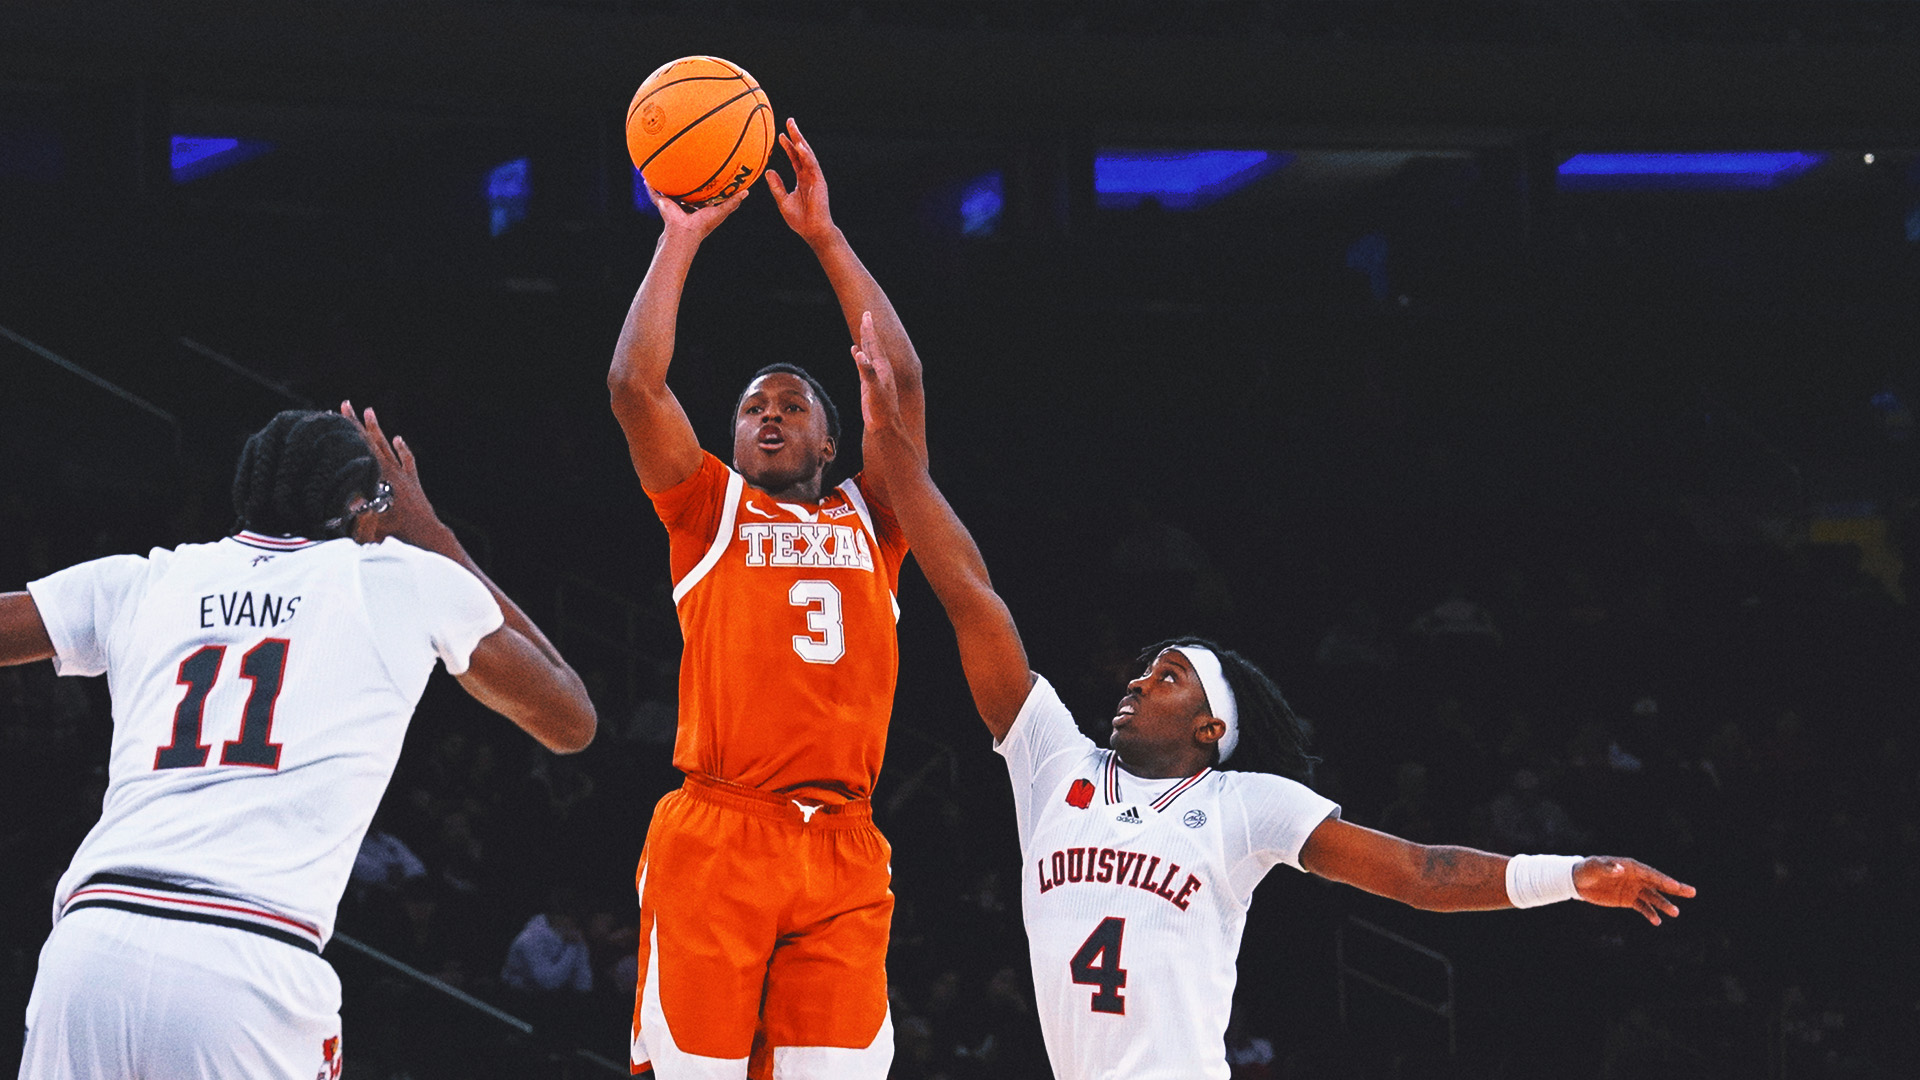 Max Abmas hits game-winner as No. 19 Texas outlasts Louisville 81-80 in Empire Classic